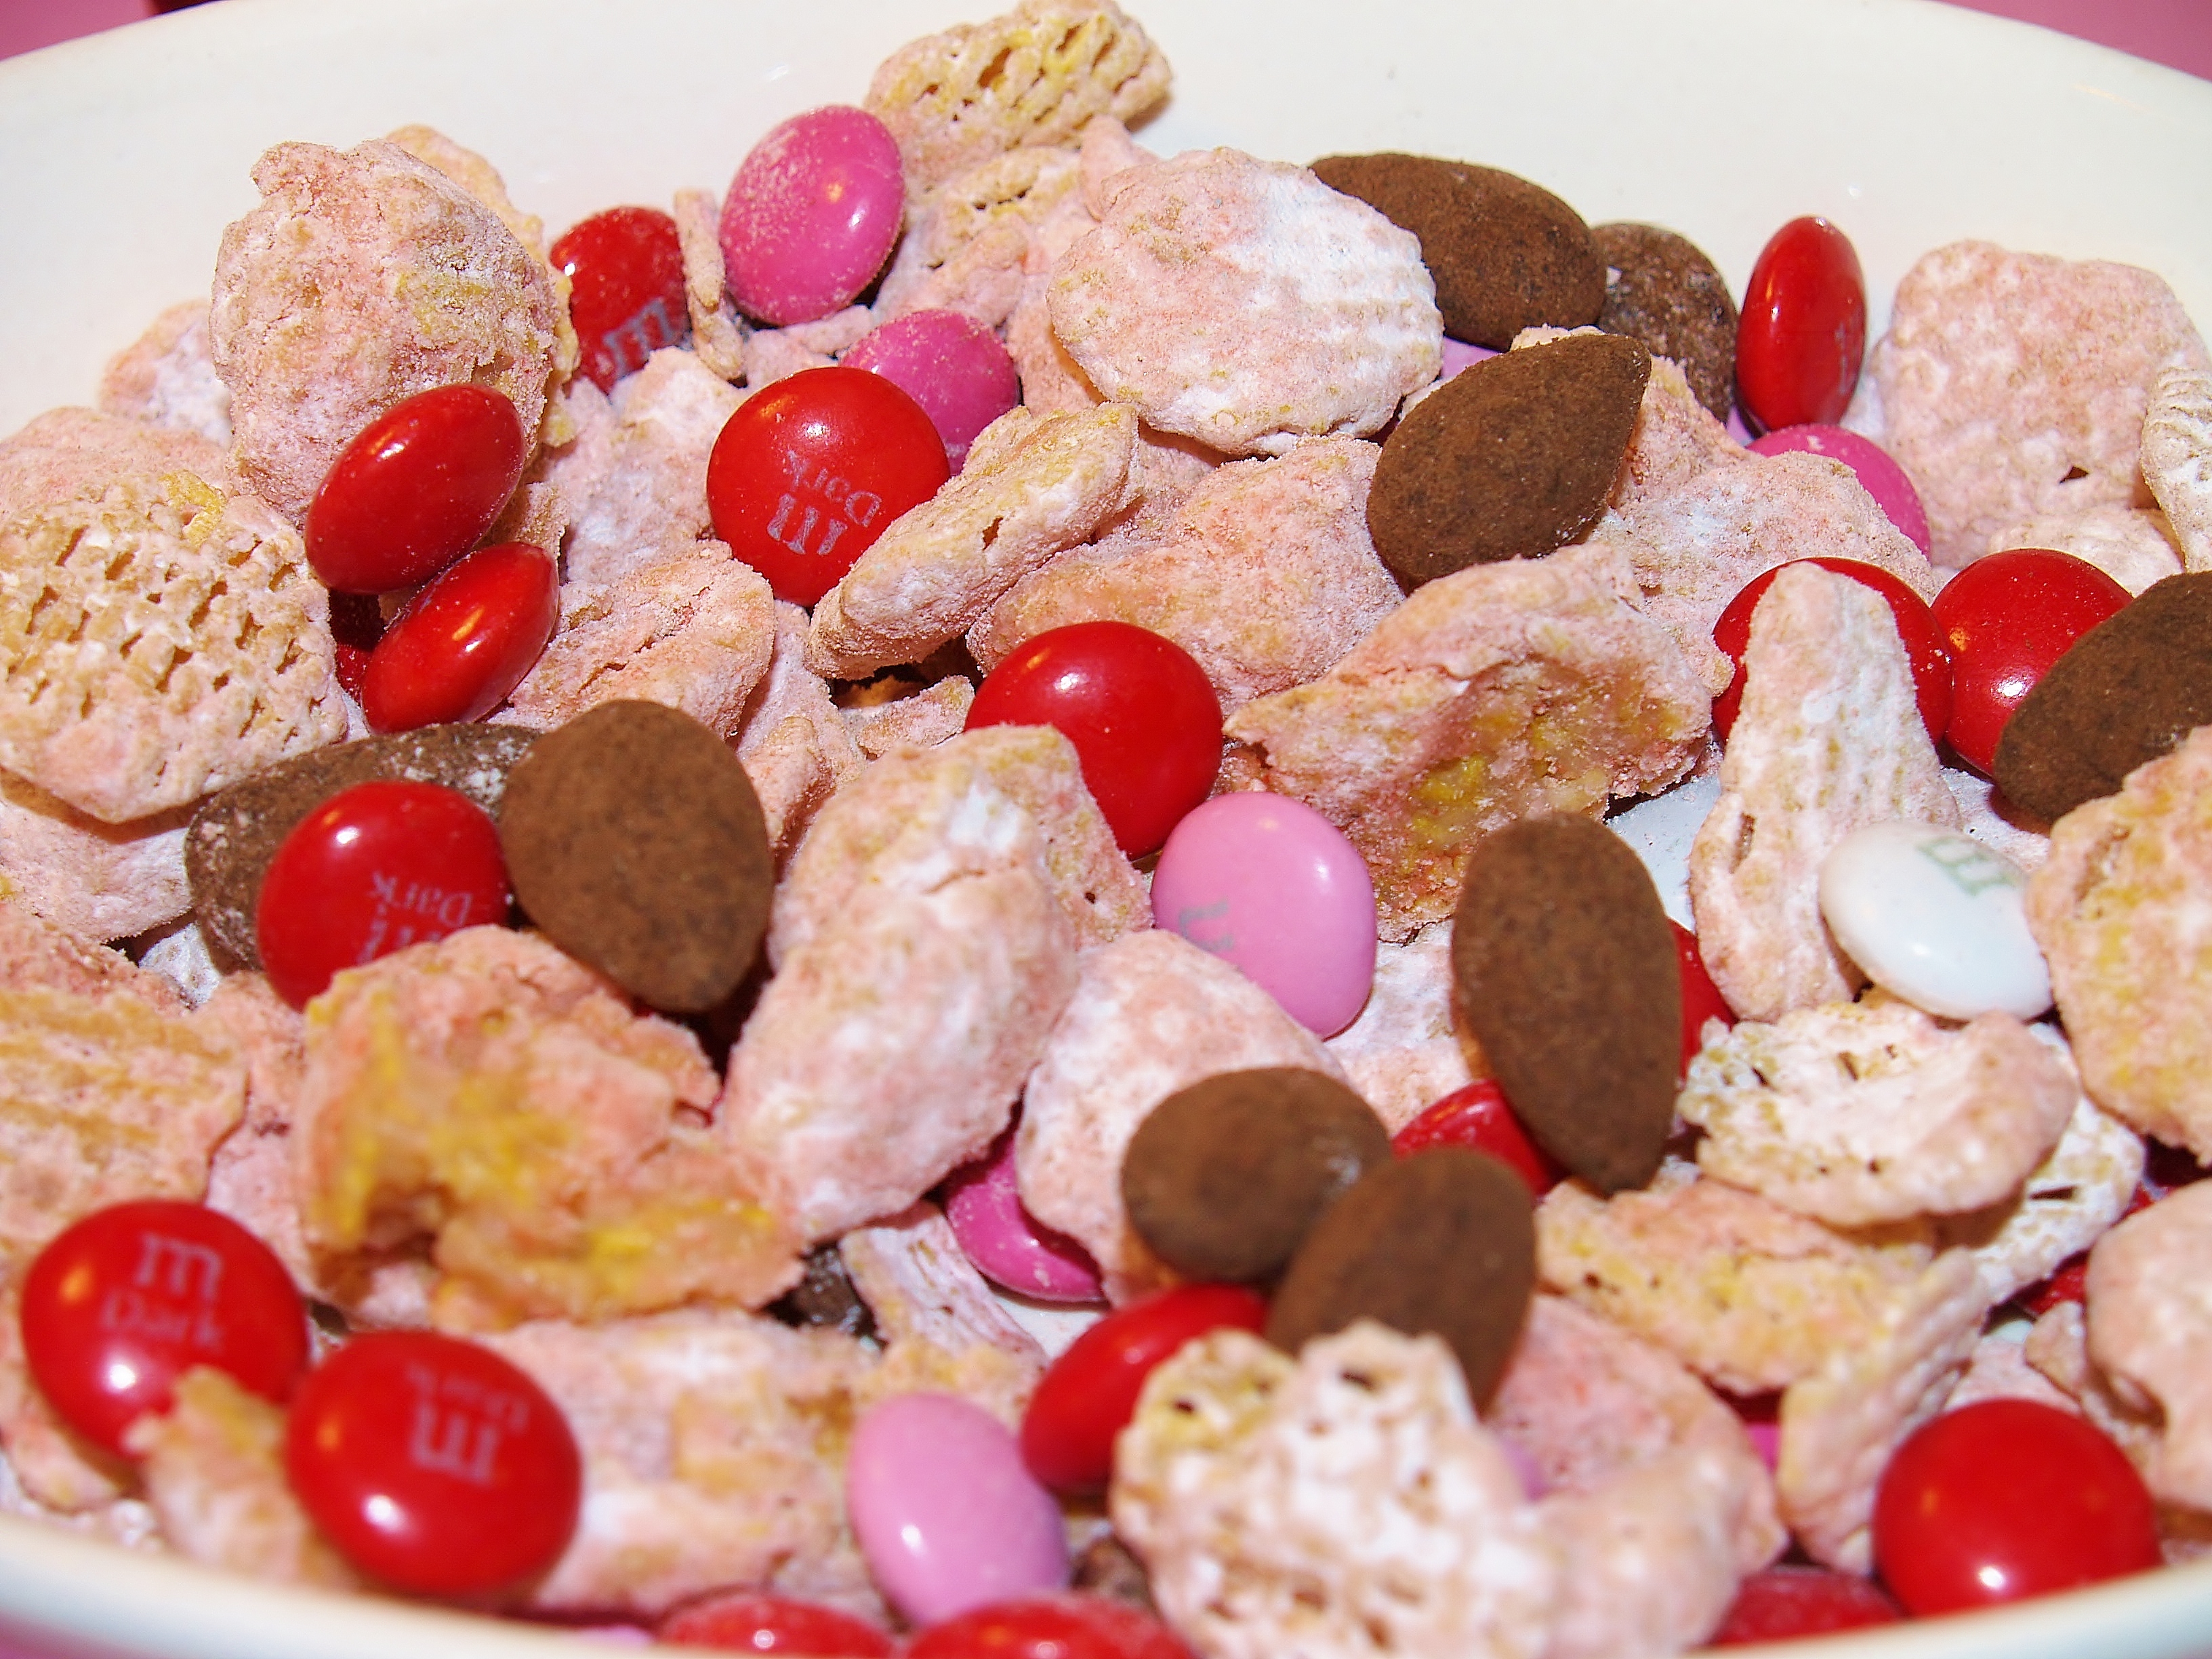 Strawberry Cheesecake Puppy Chow with Dark Chocolate Accent